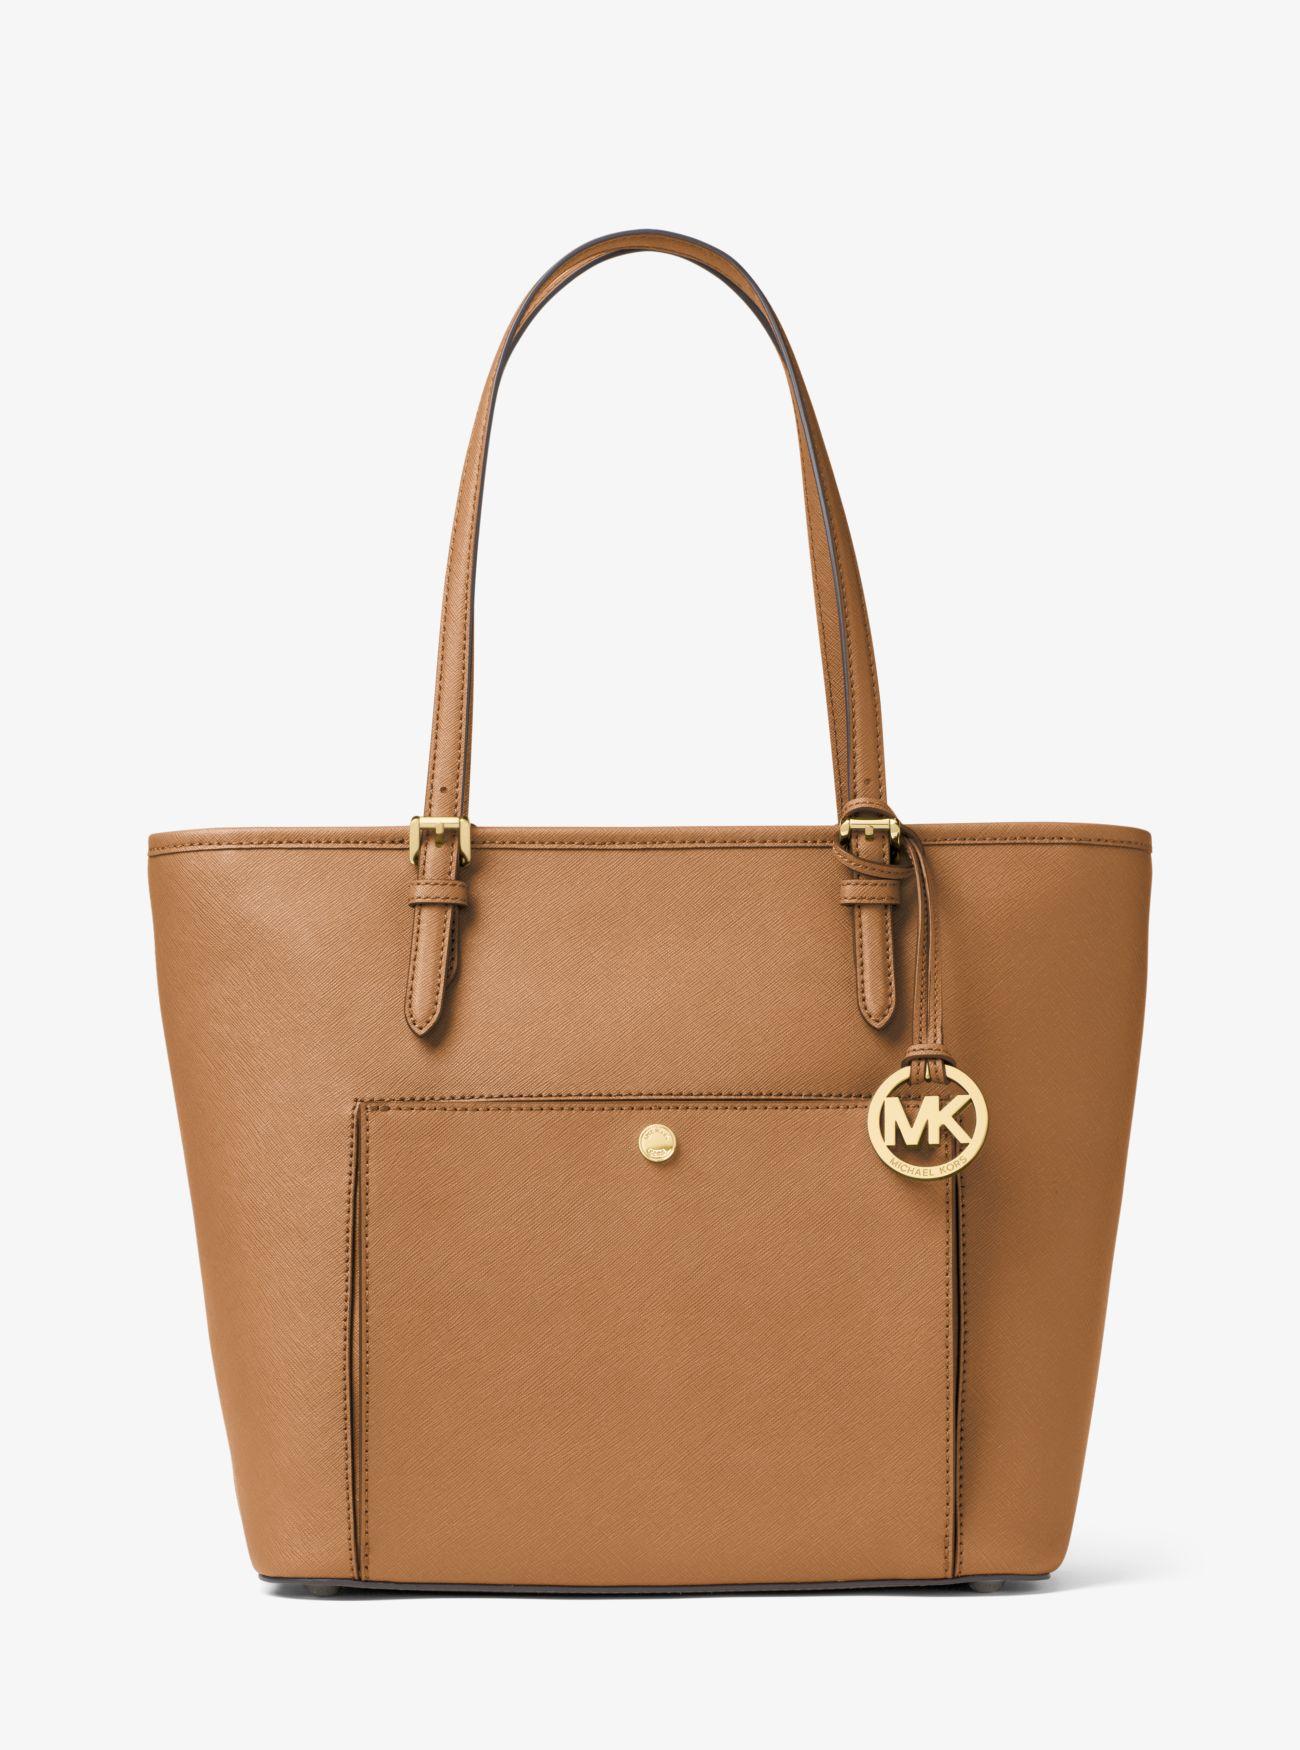 Lyst - MICHAEL Michael Kors Jet Set Large Saffiano Leather Tote Bag in Brown